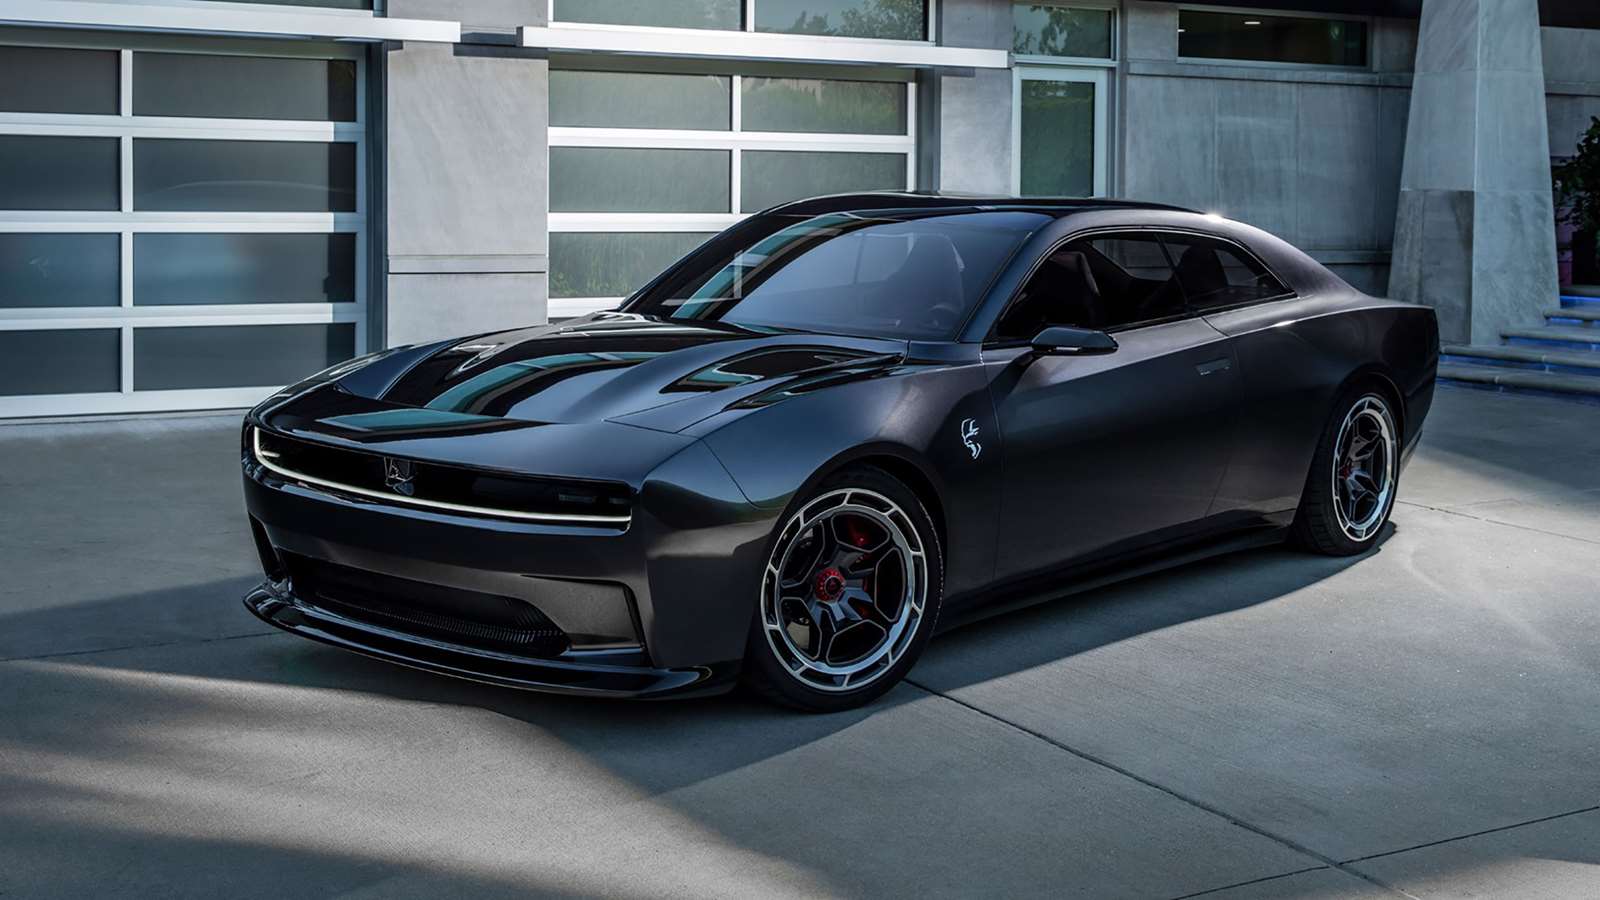 The Dodge Banshee is the first BEV muscle car